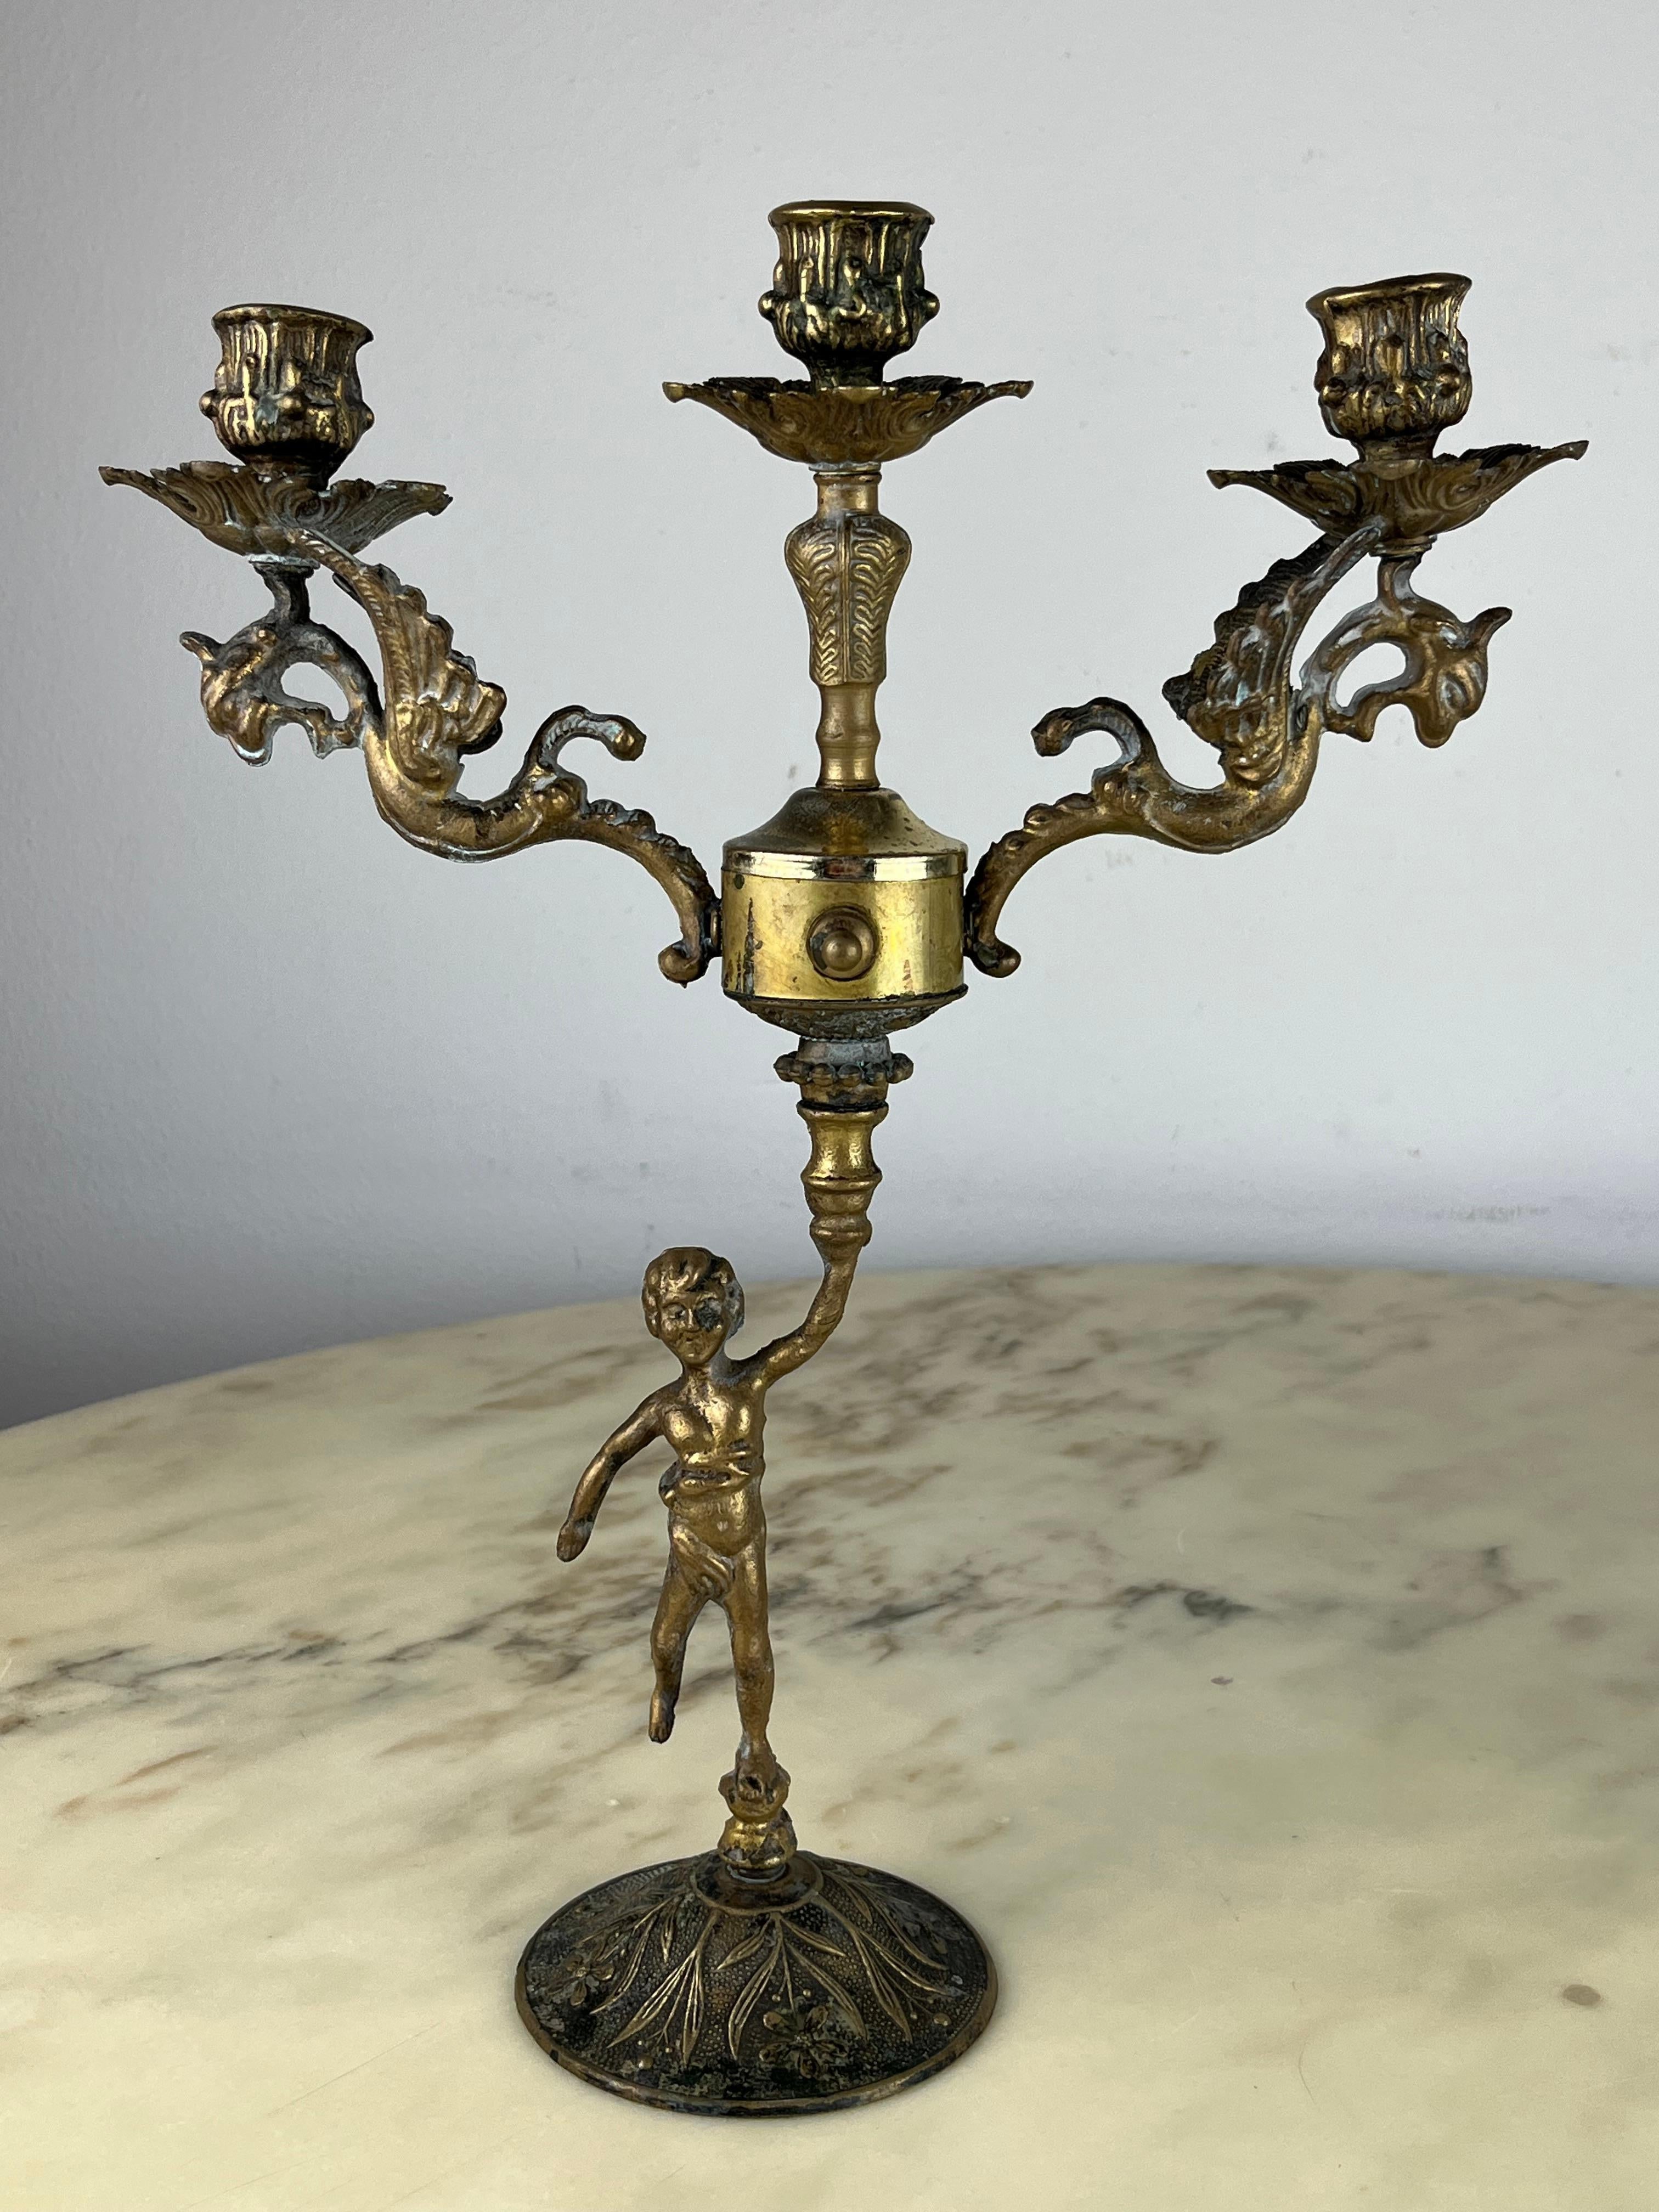 Pair of Italian bronze candlesticks, 1960s
Found in a noble apartment, they are intact and in good condition.
Small signs of aging.